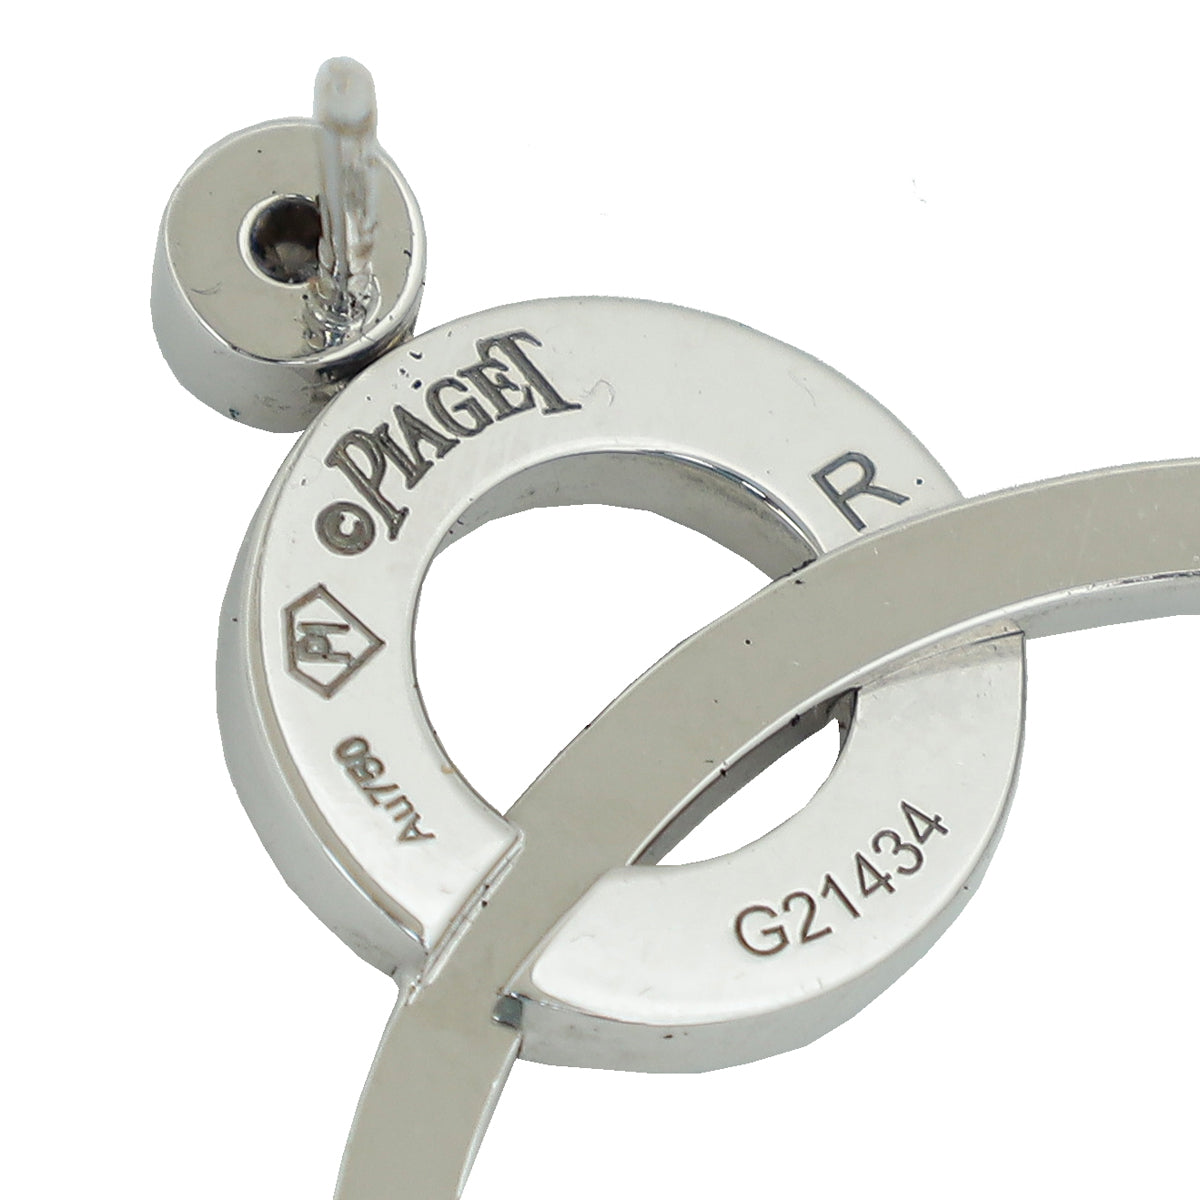 Load image into Gallery viewer, Piaget 18K White Gold and Diamond Possession Earrings
